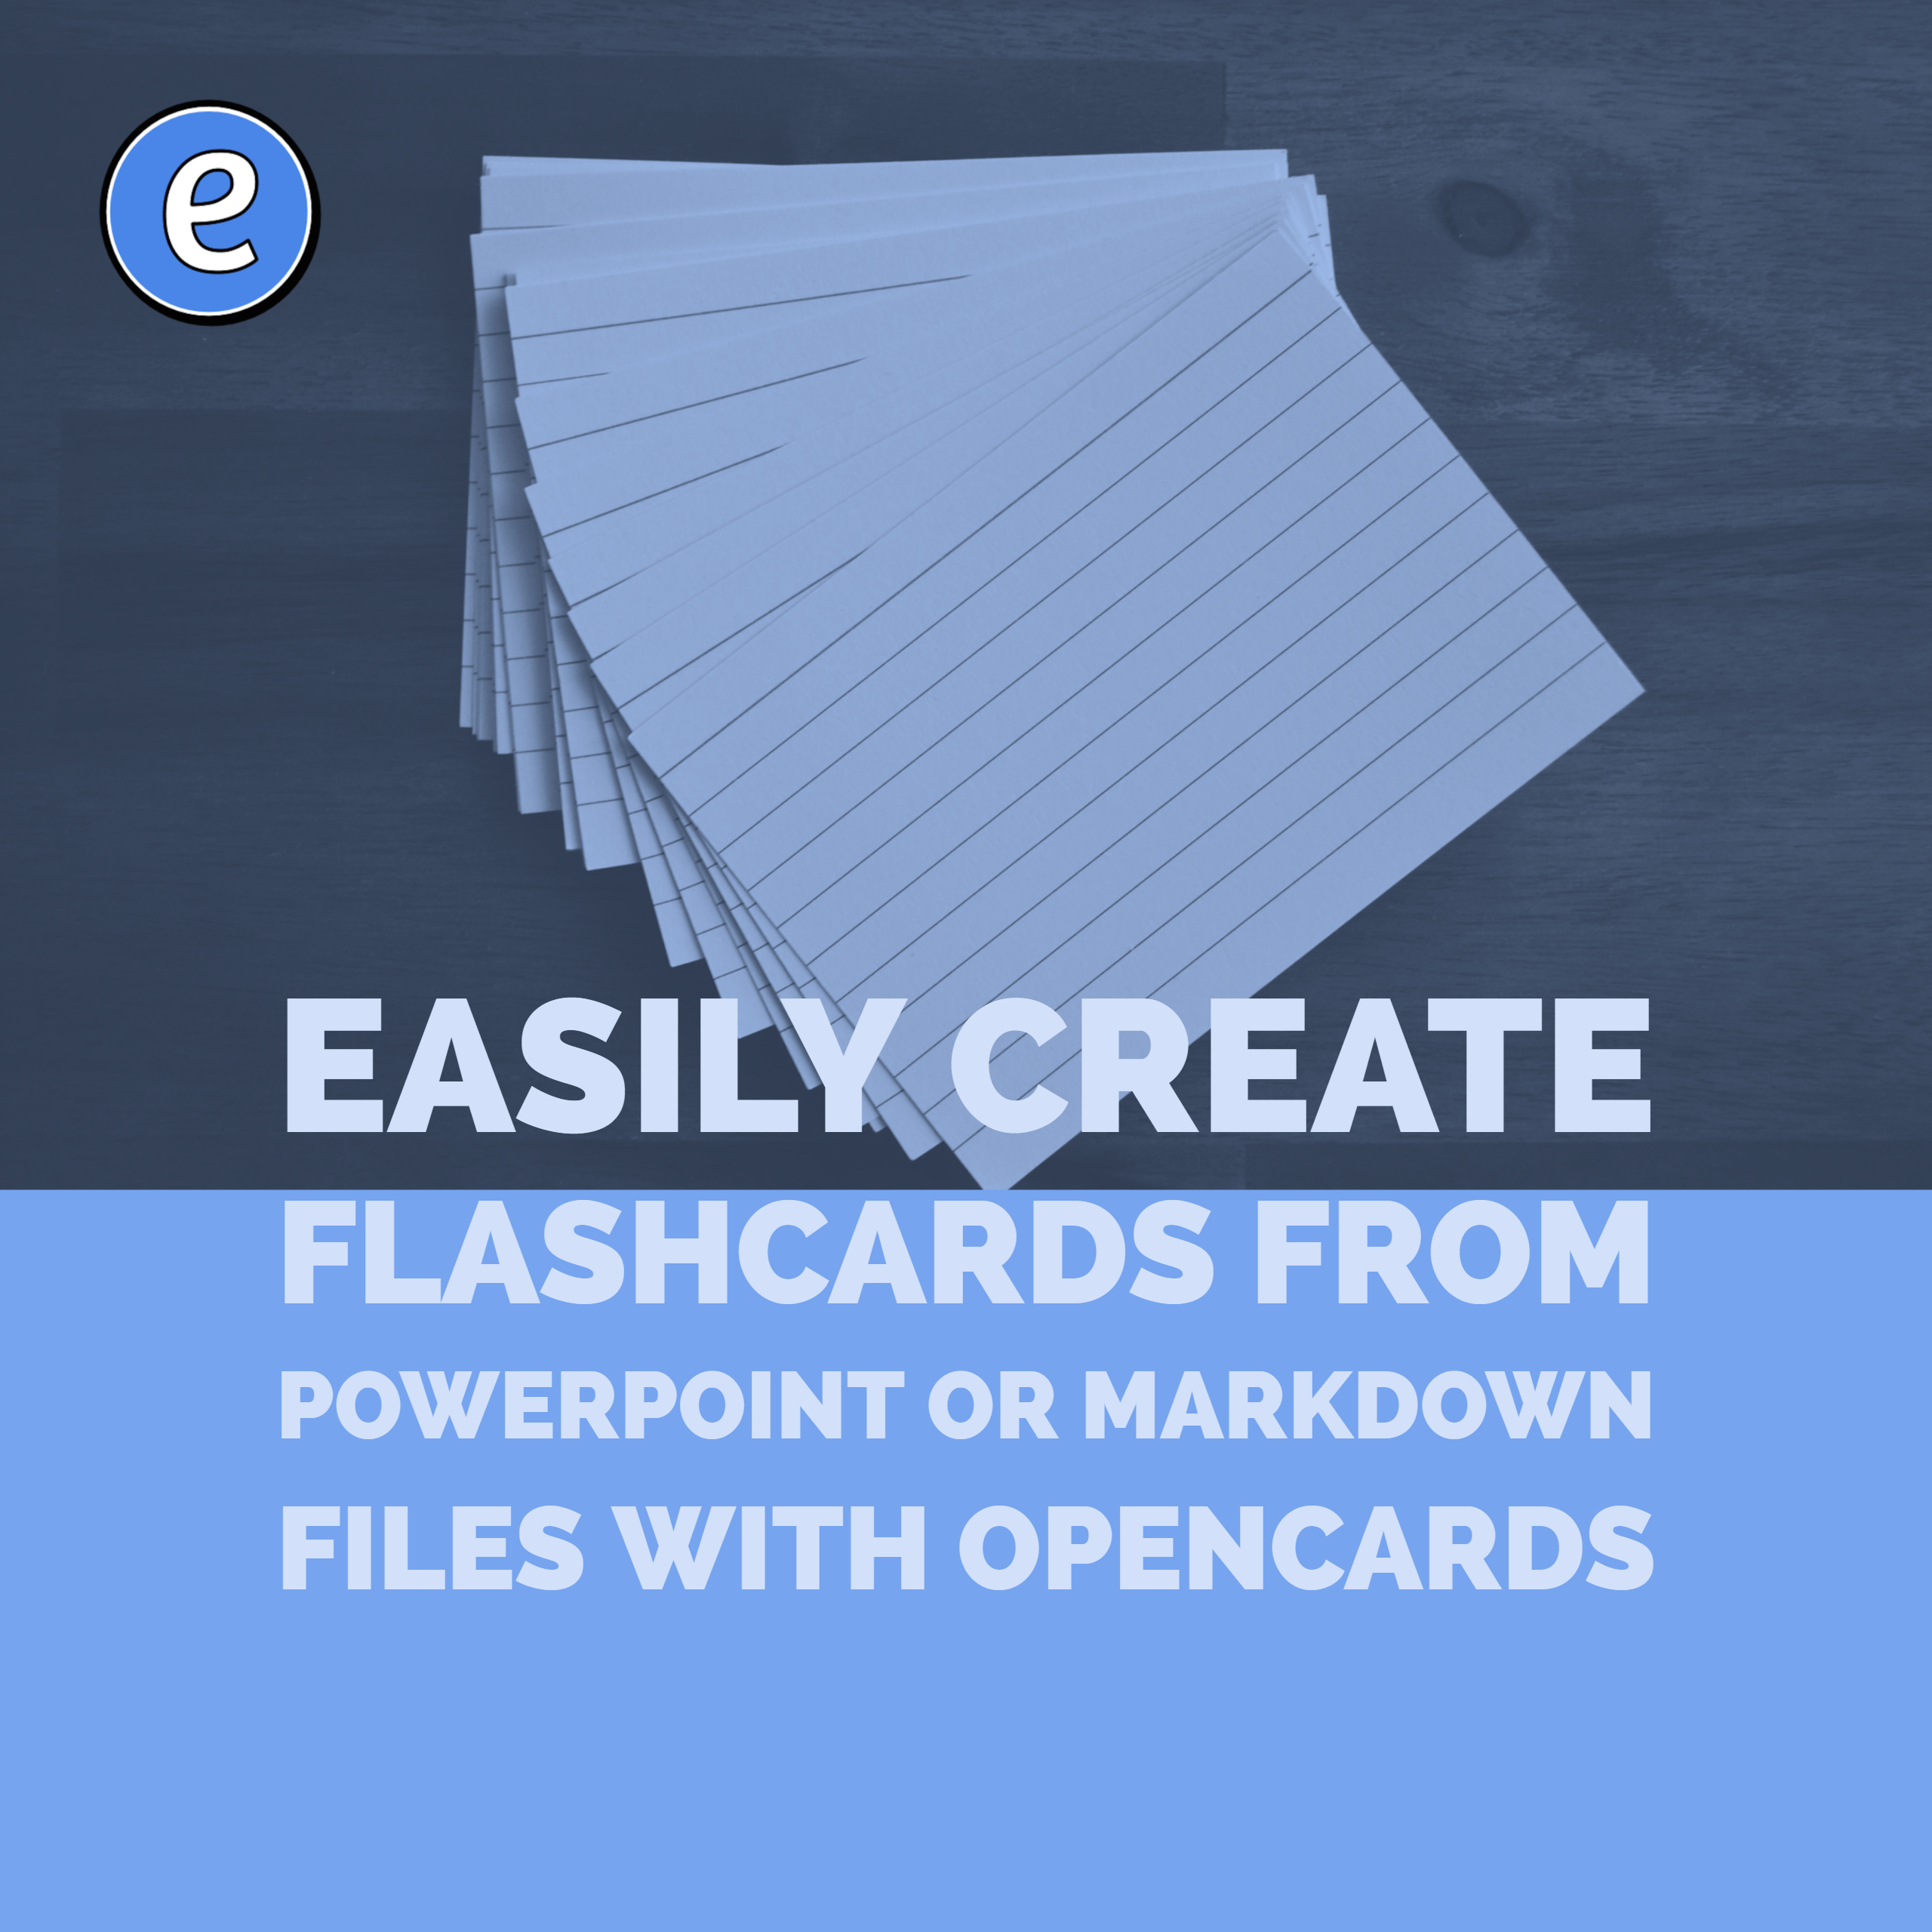 Easily create flashcards from PowerPoint or Markdown files with OpenCards